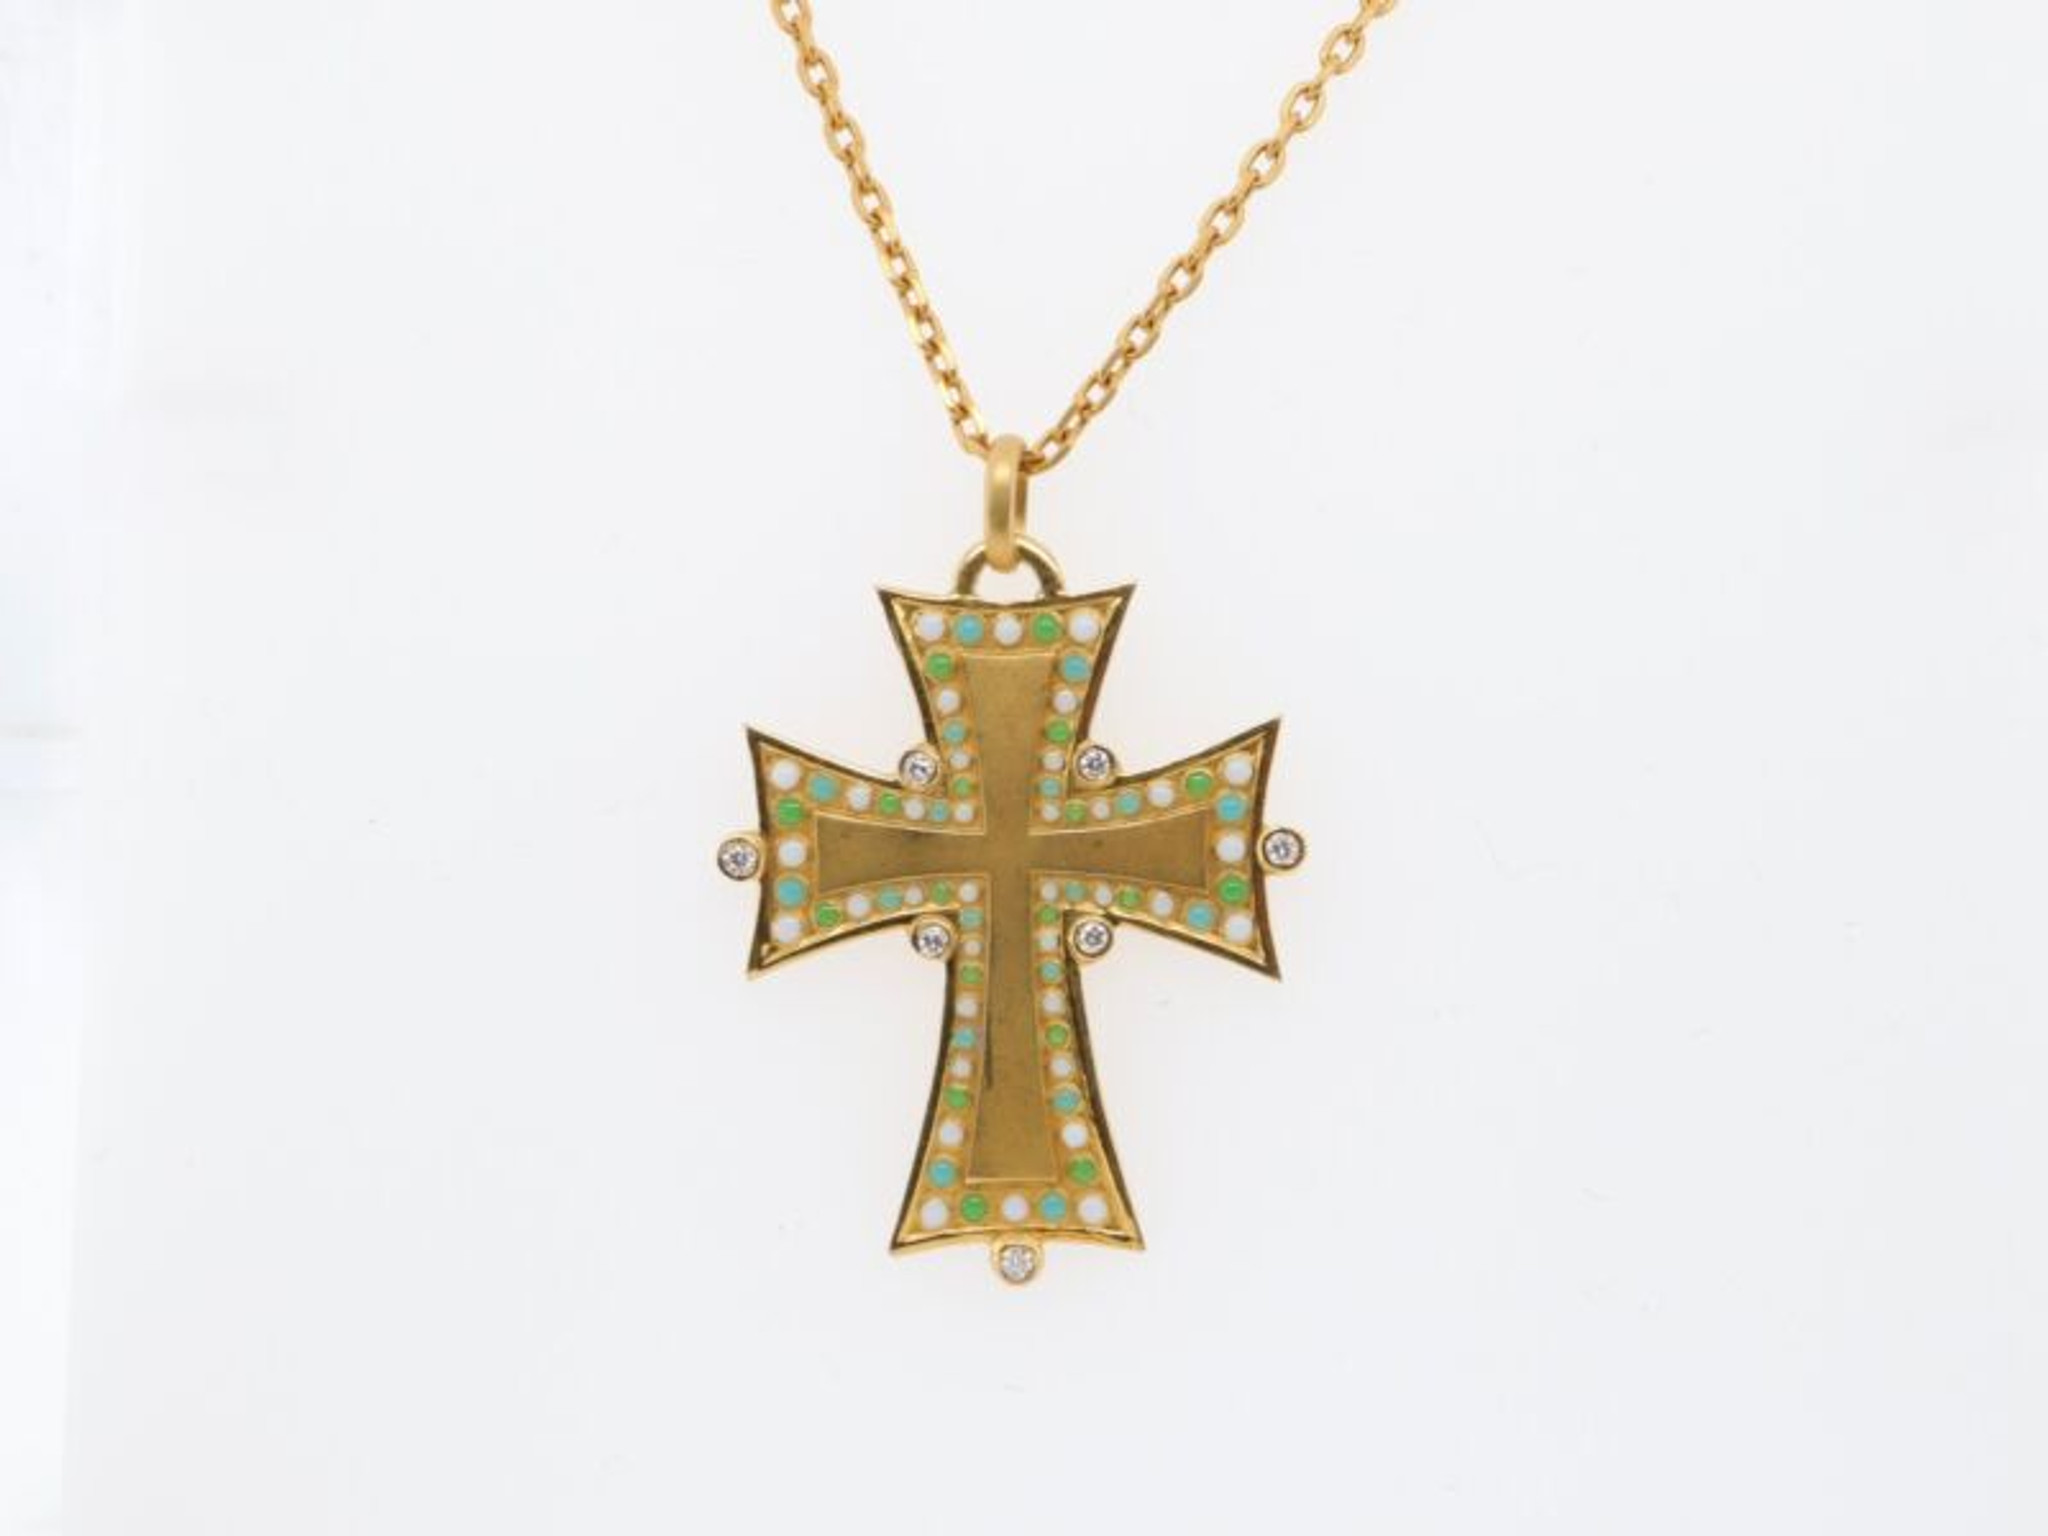 Inglessis Collection Tradition Gold Cross Necklace K14 Yellow Gold -  Inglessis